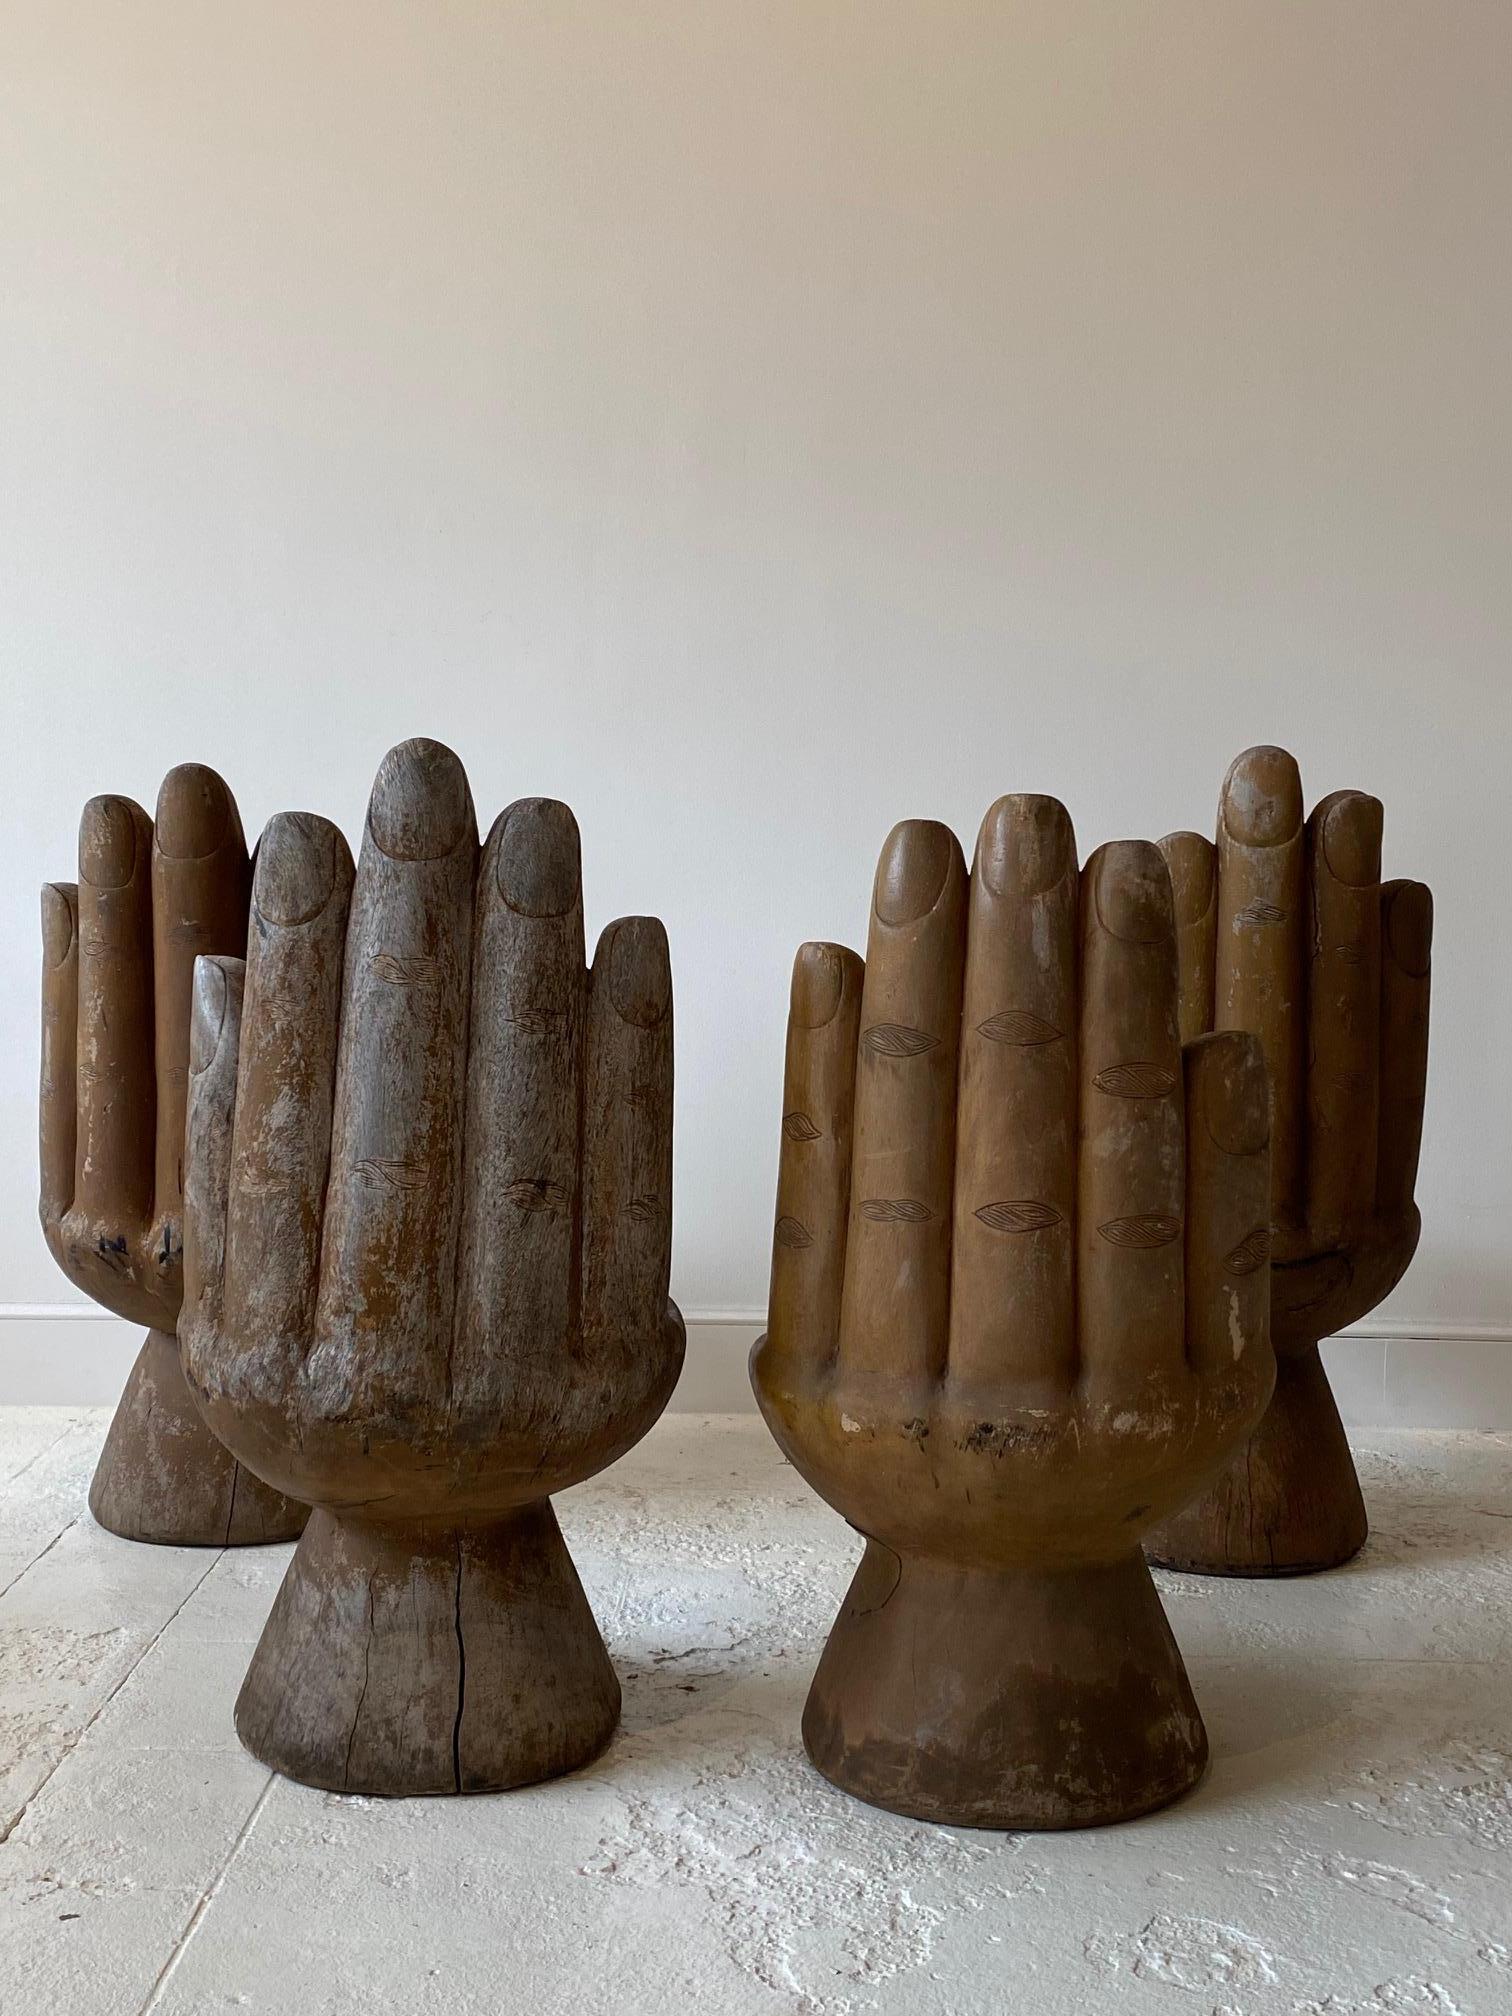 Set of four wooden hand chairs in the style of style of Pedro Friedeberg. A unique, hand carved wood chair in the shape of a cupped hand.